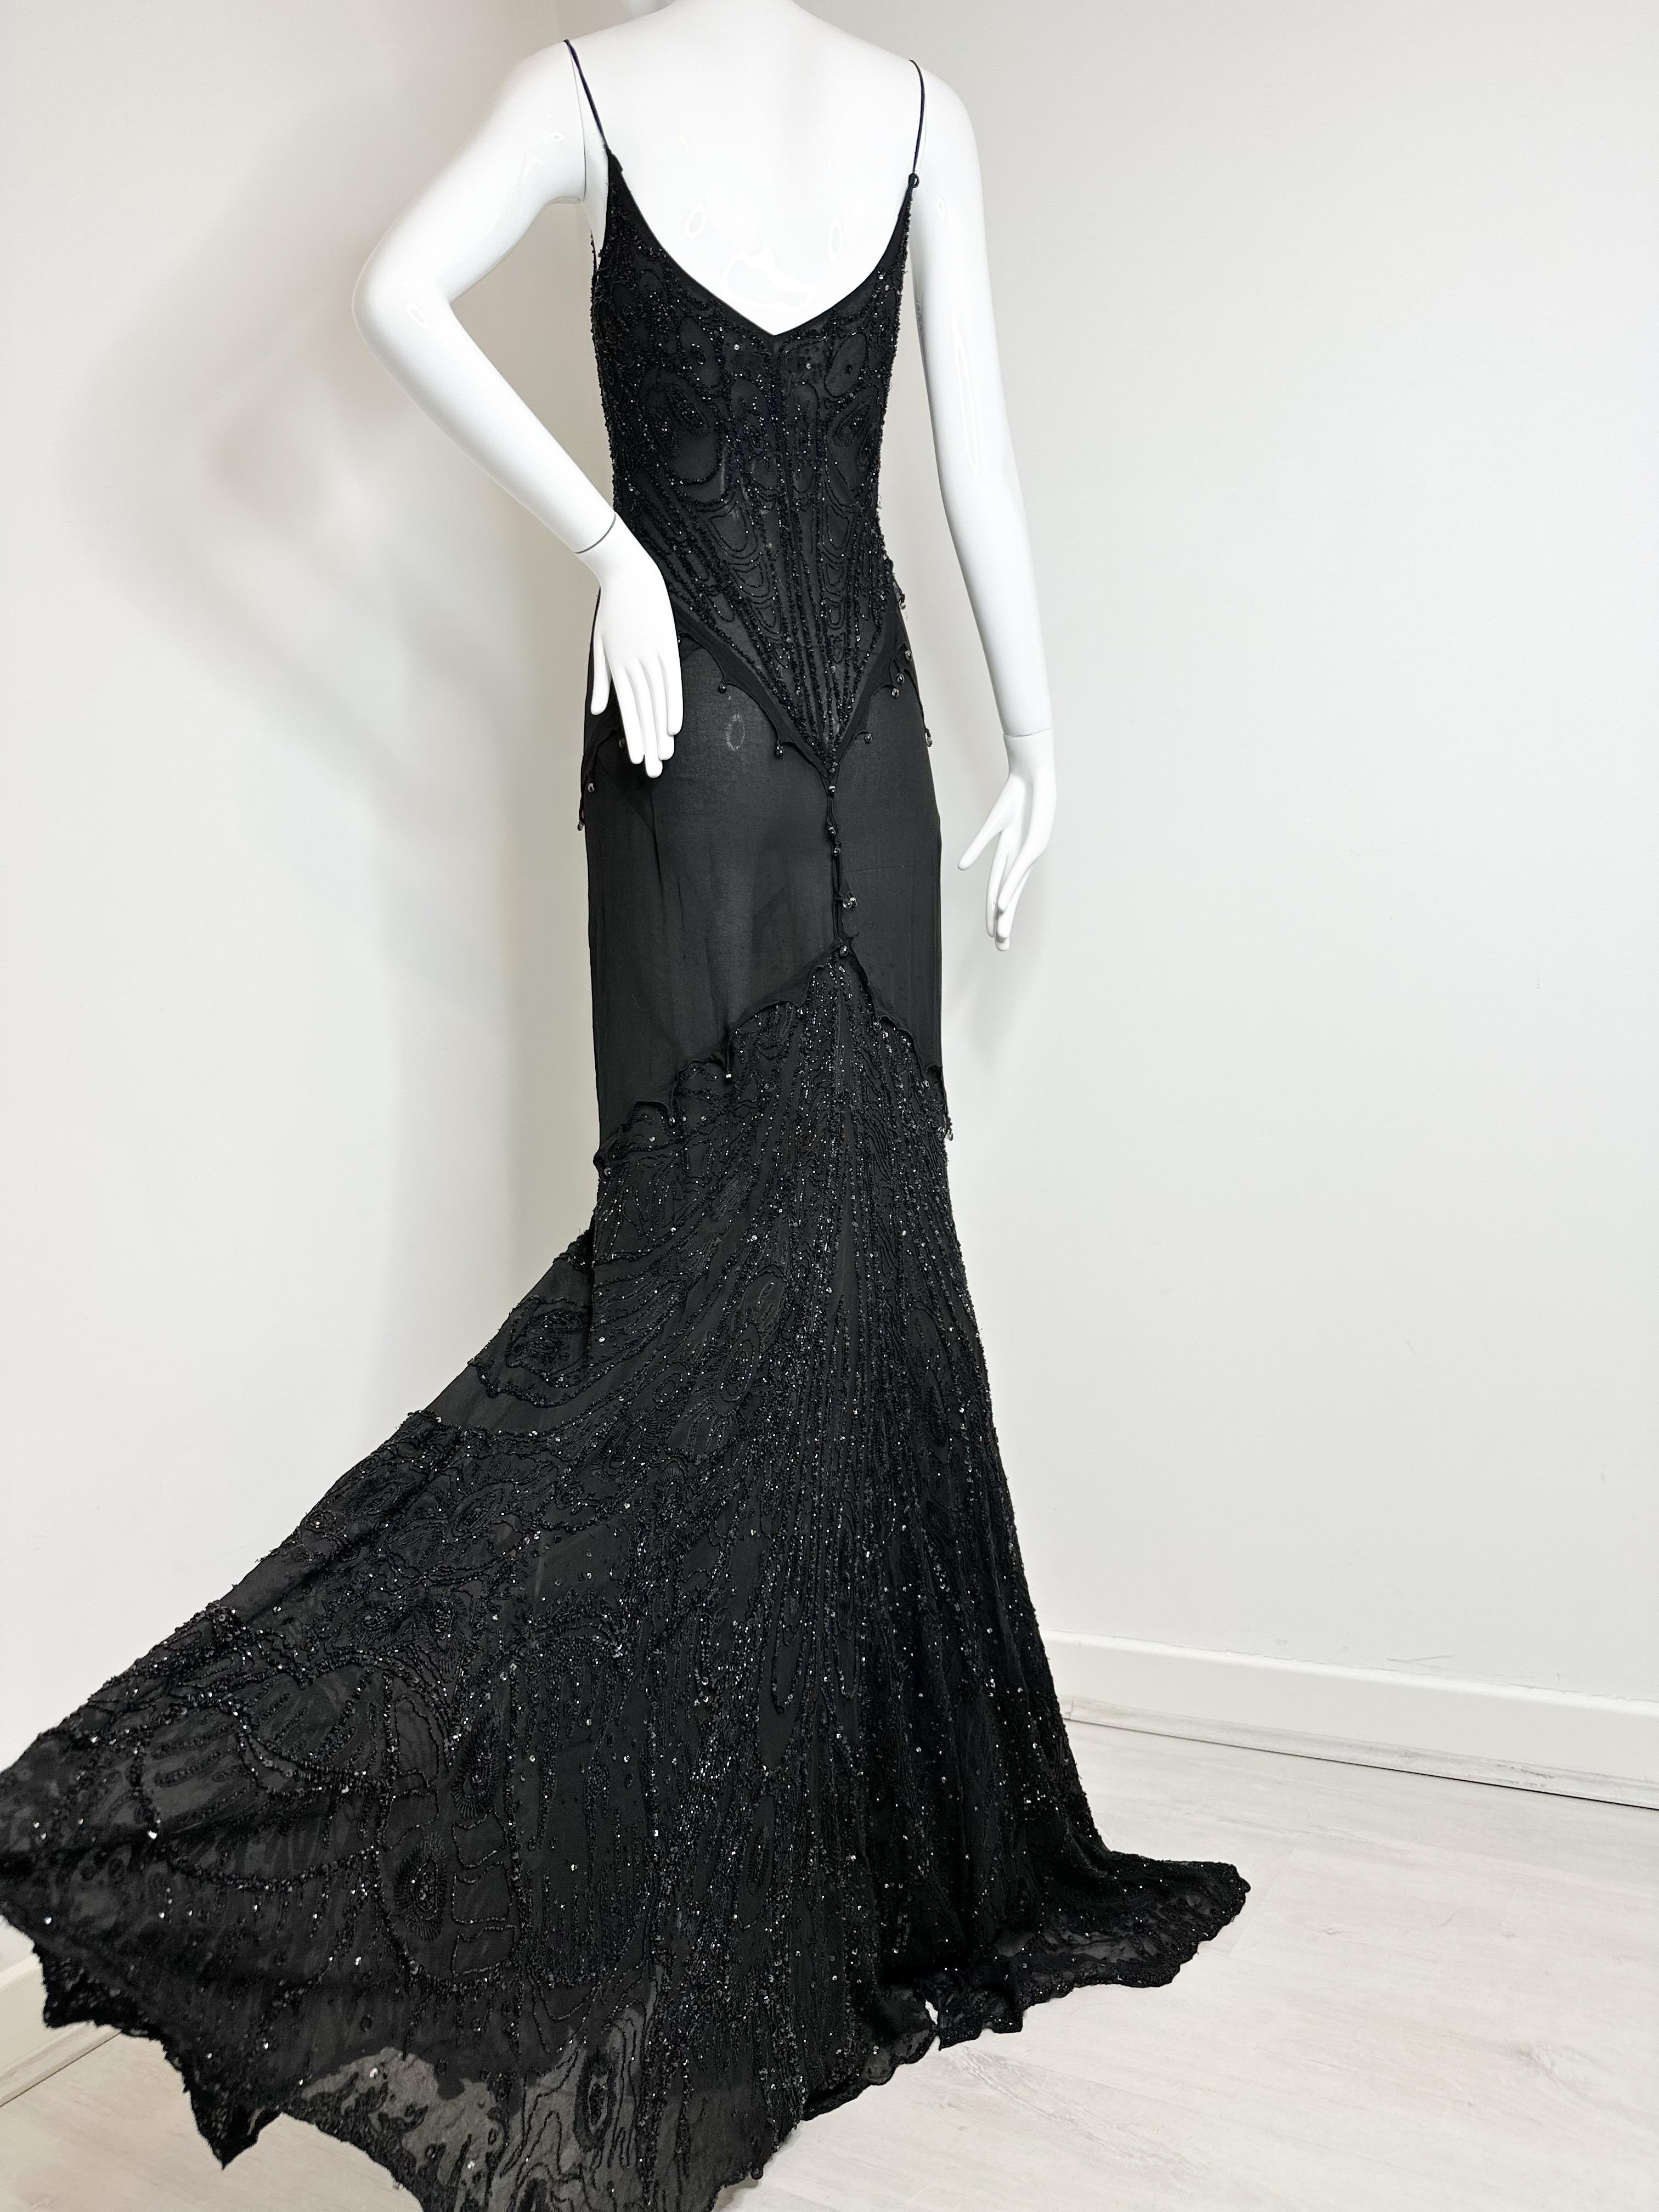 Roberto Cavalli 2003 beaded black gown 

It’s absolutely breathtaking! Part of my collection and I’m only willing to part with it for the right price 

No size tag as it was removed but it’s size S 

Overall it’s in good vintage condition. There are